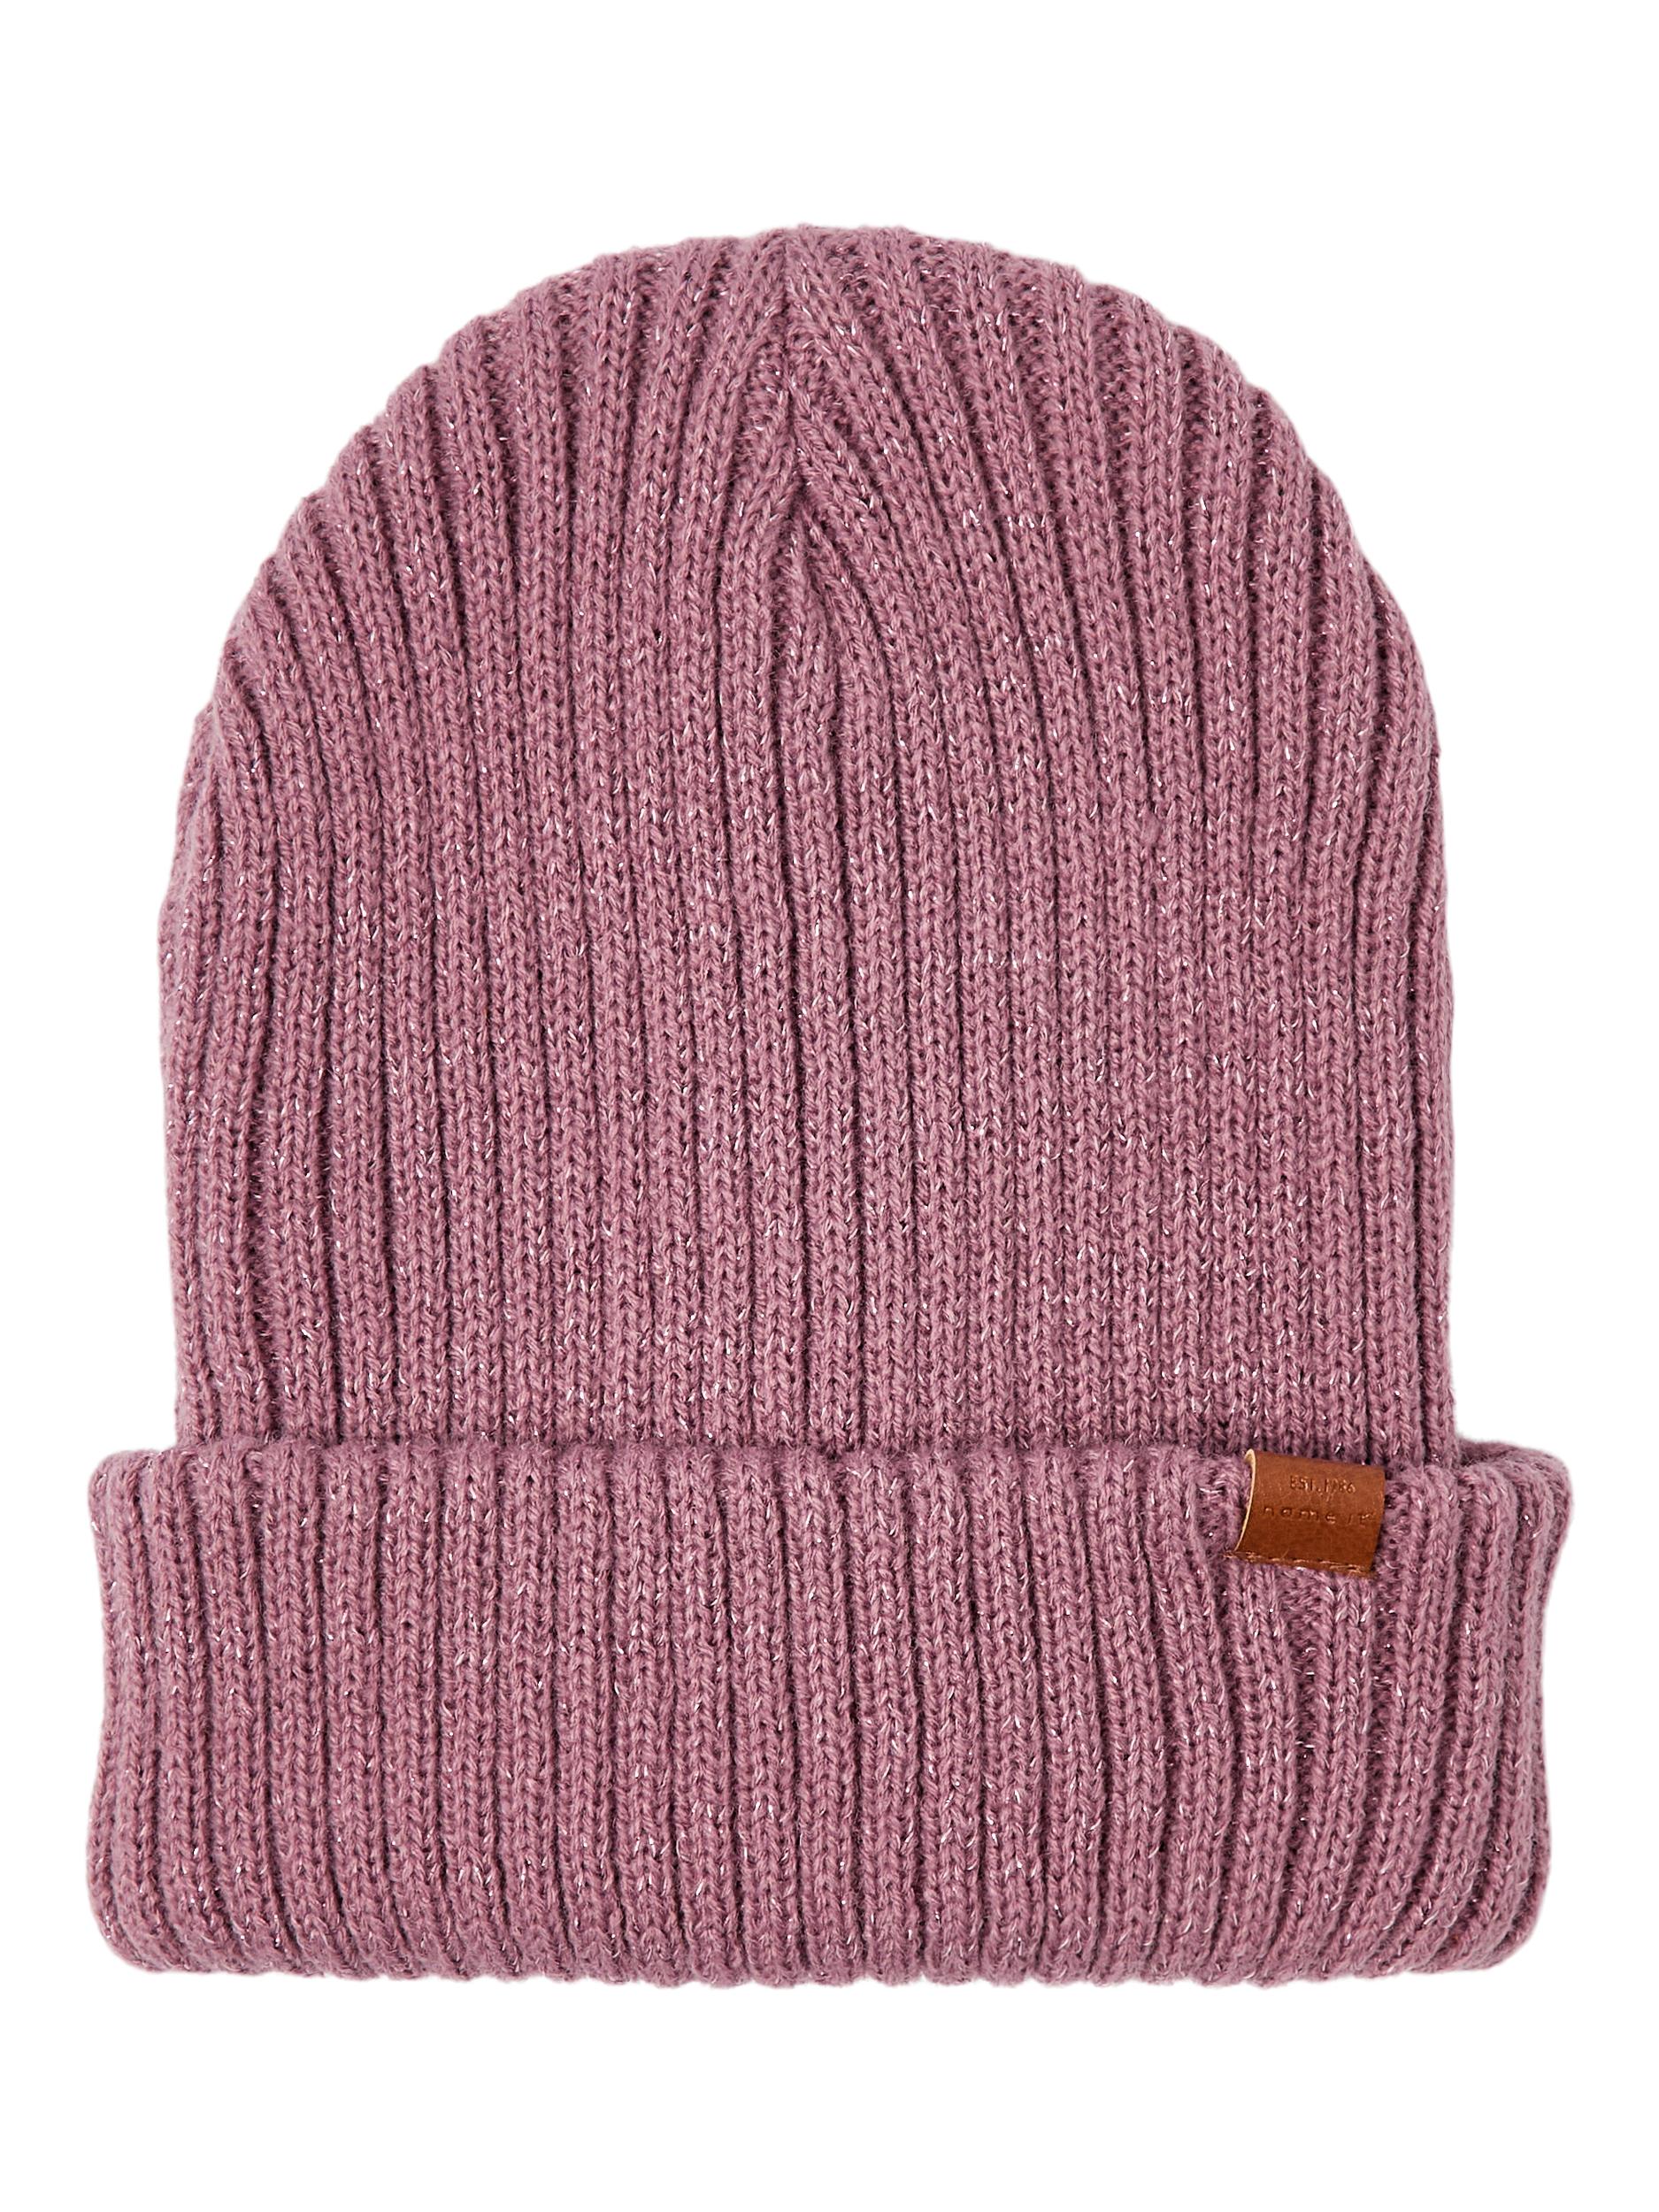 Name It cappello kids rosa basic a coste